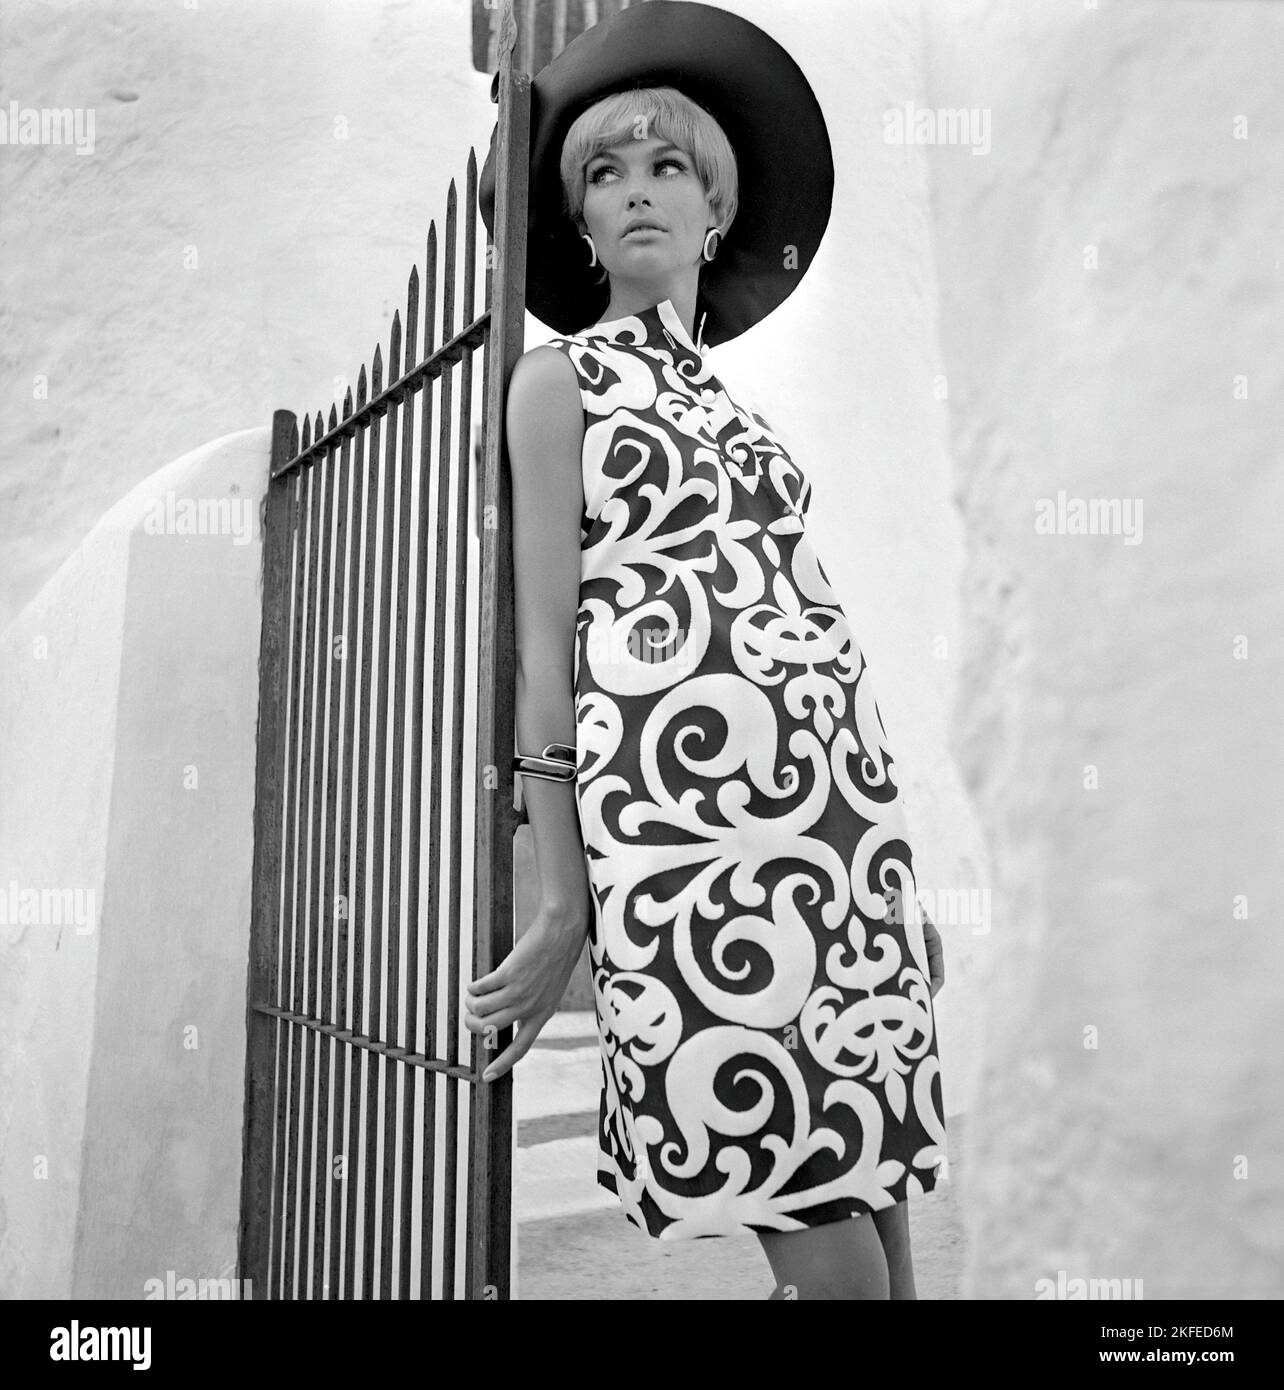 Fashion shoot on the spanish island Ibiza in the 1960s. A fashion model on location models the typical summer dress and hat. 1967 Stock Photo